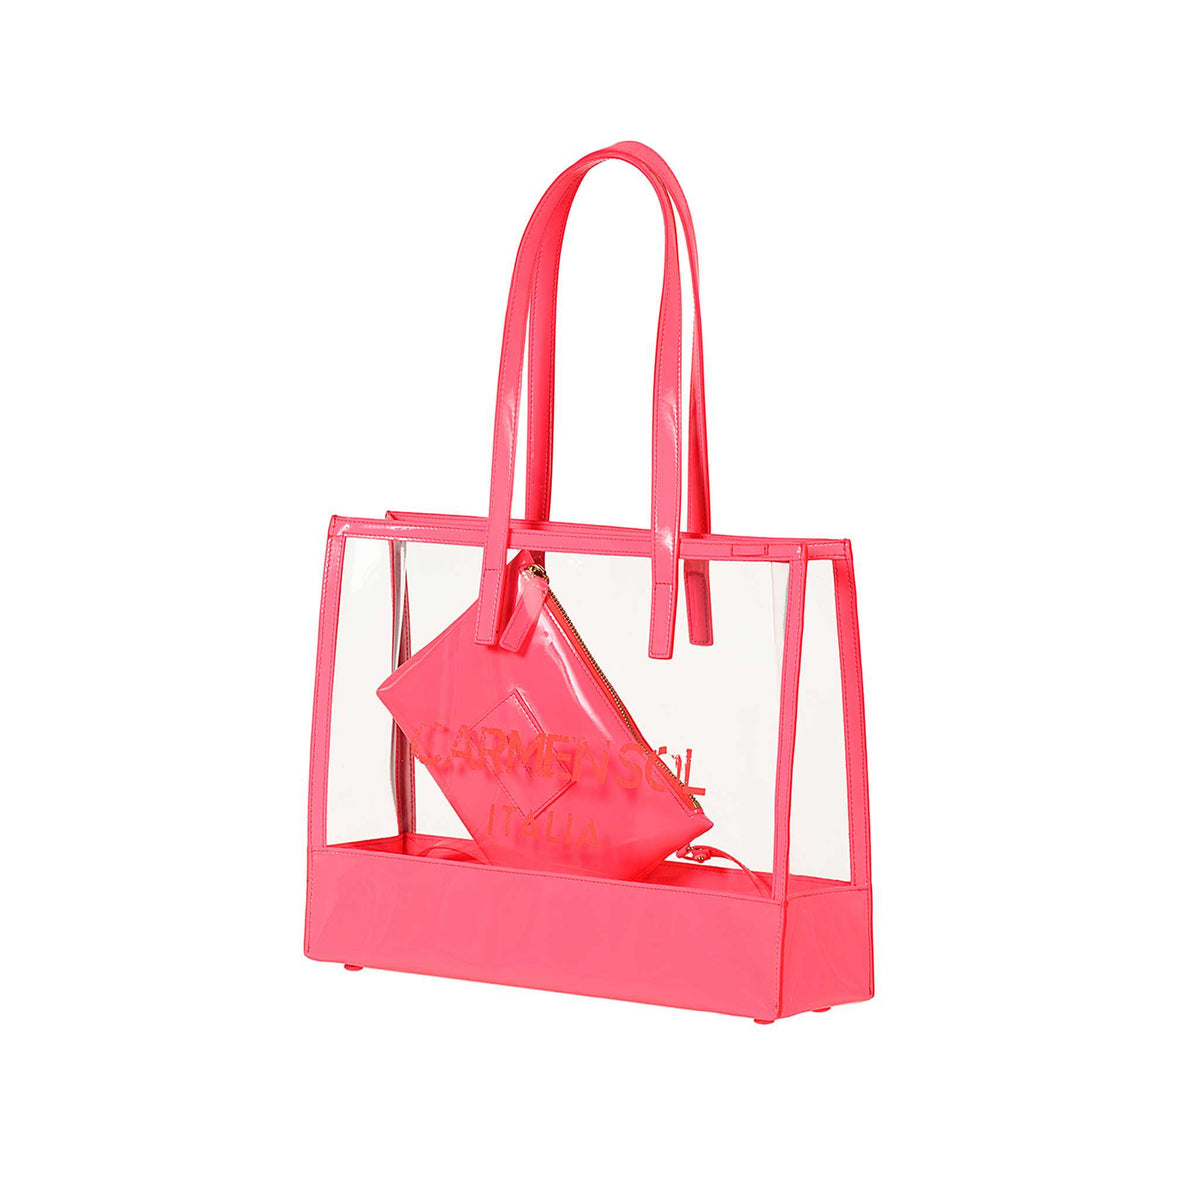 Neon pink clear jelly purse from Carmen Sol